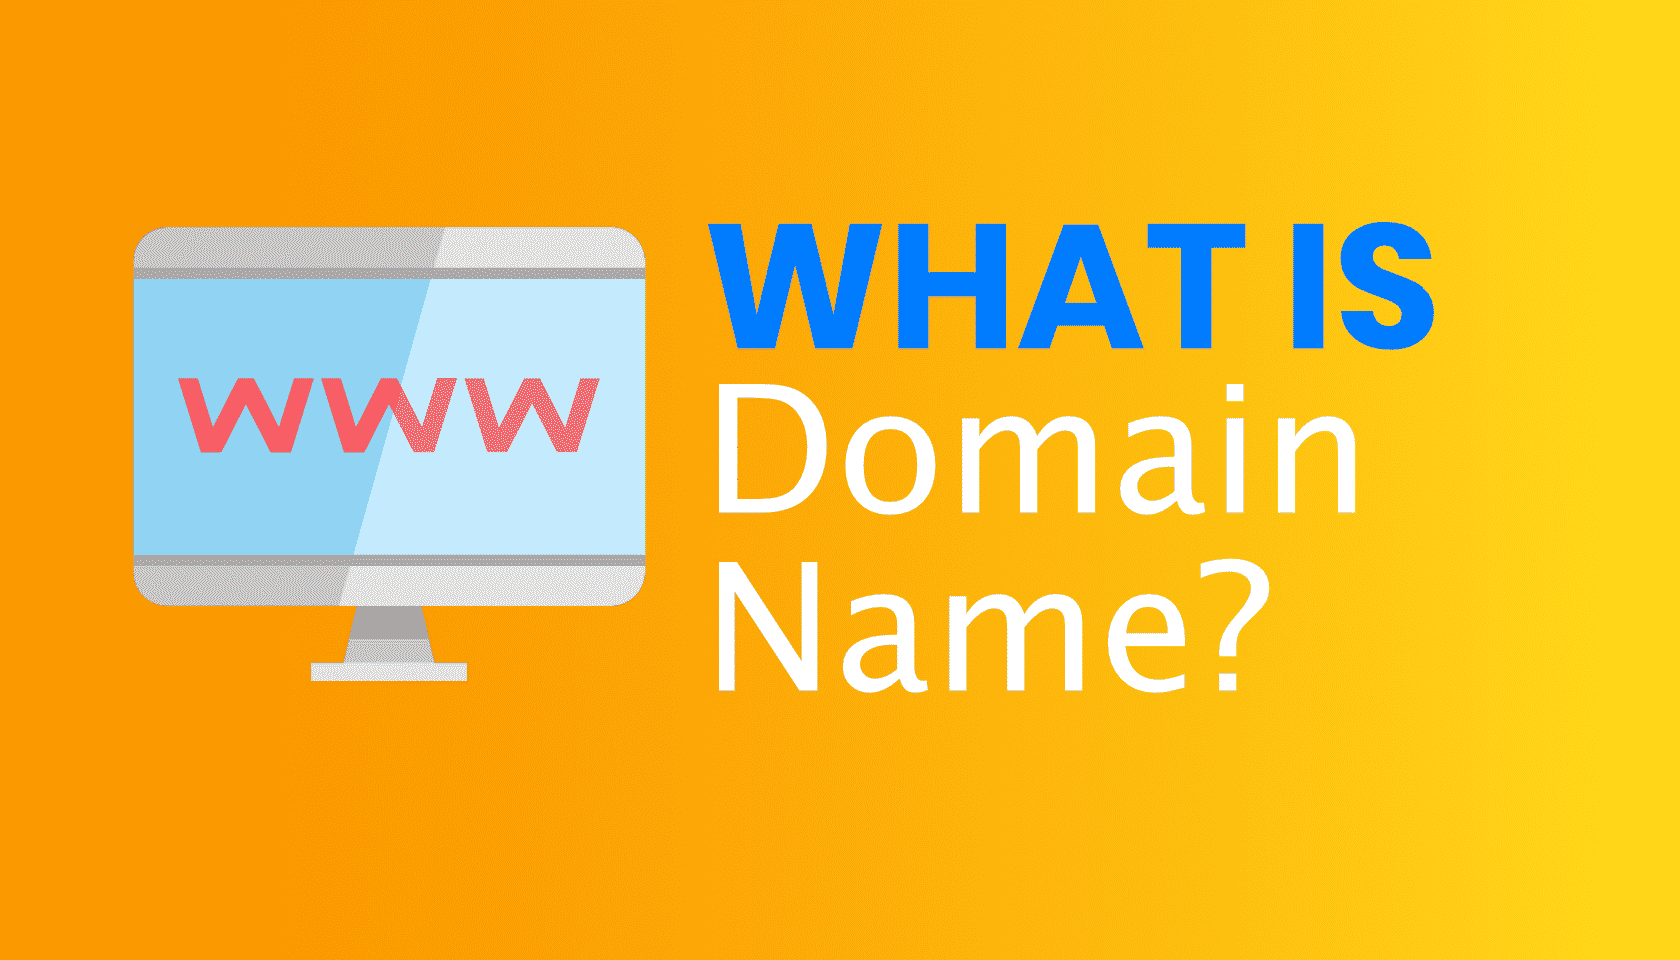 What is: Domain Name?